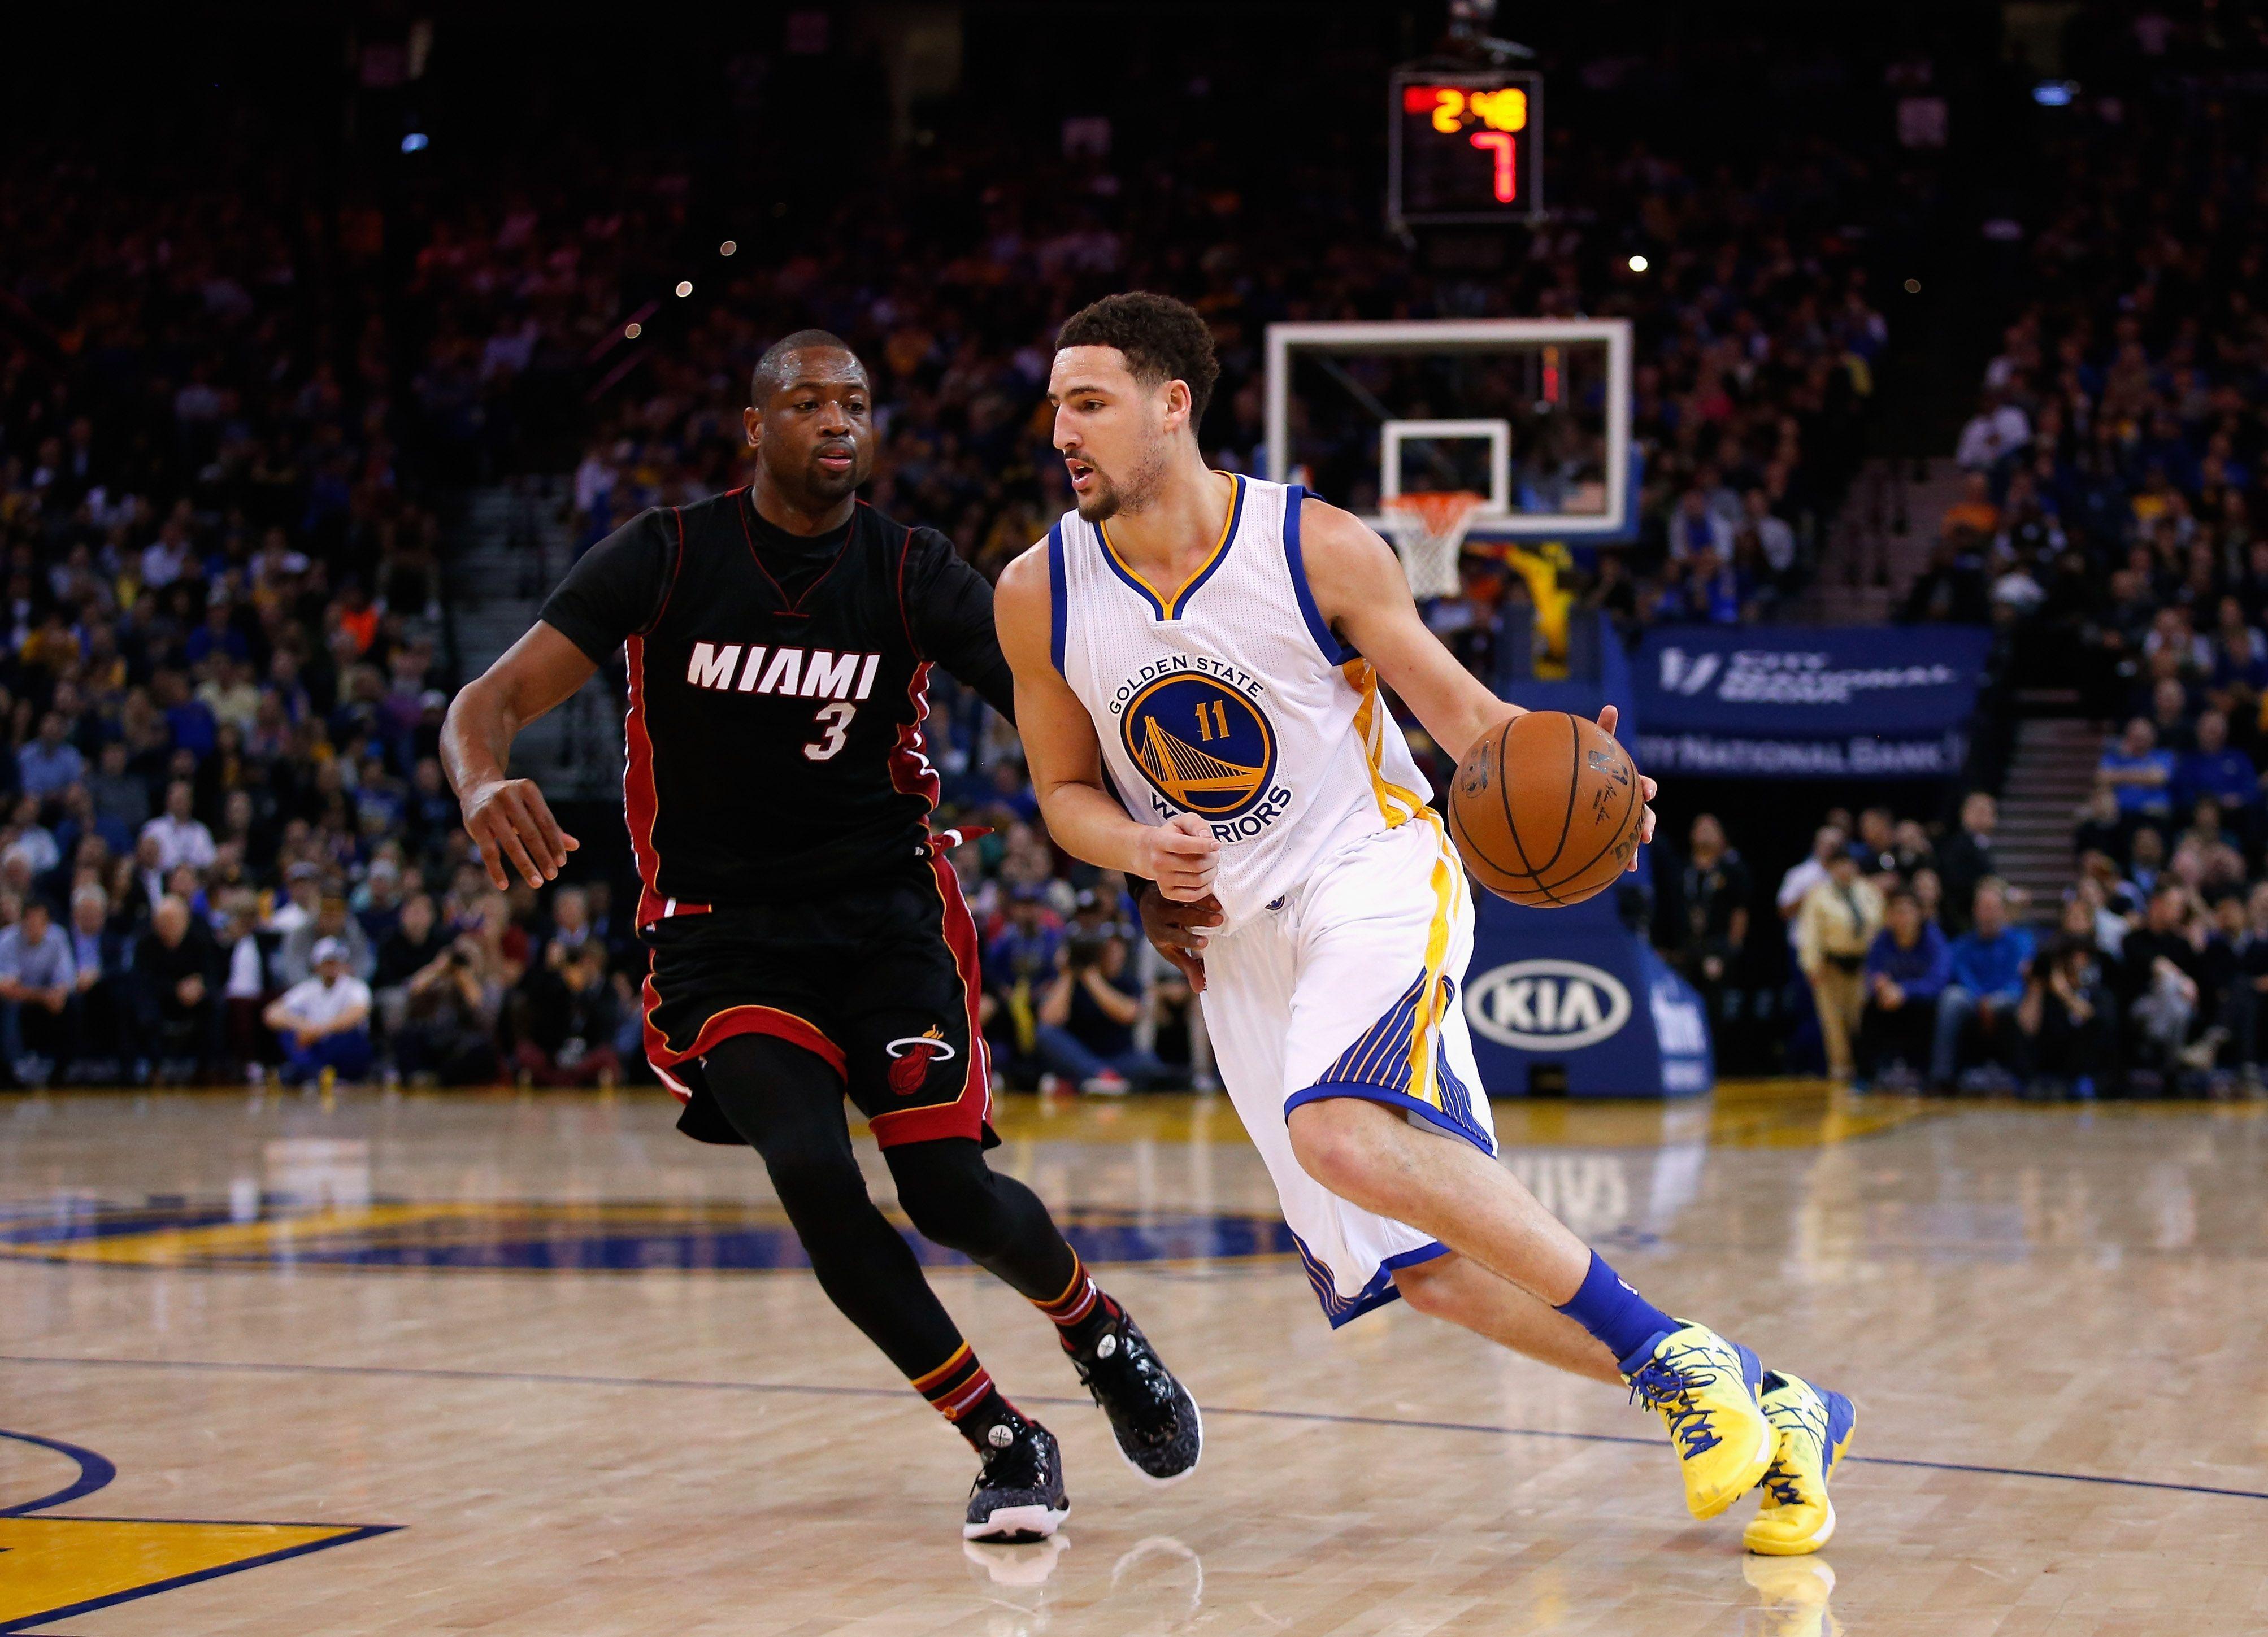 Does Dwyane Wade want the Golden State Warriors to get to 73 wins